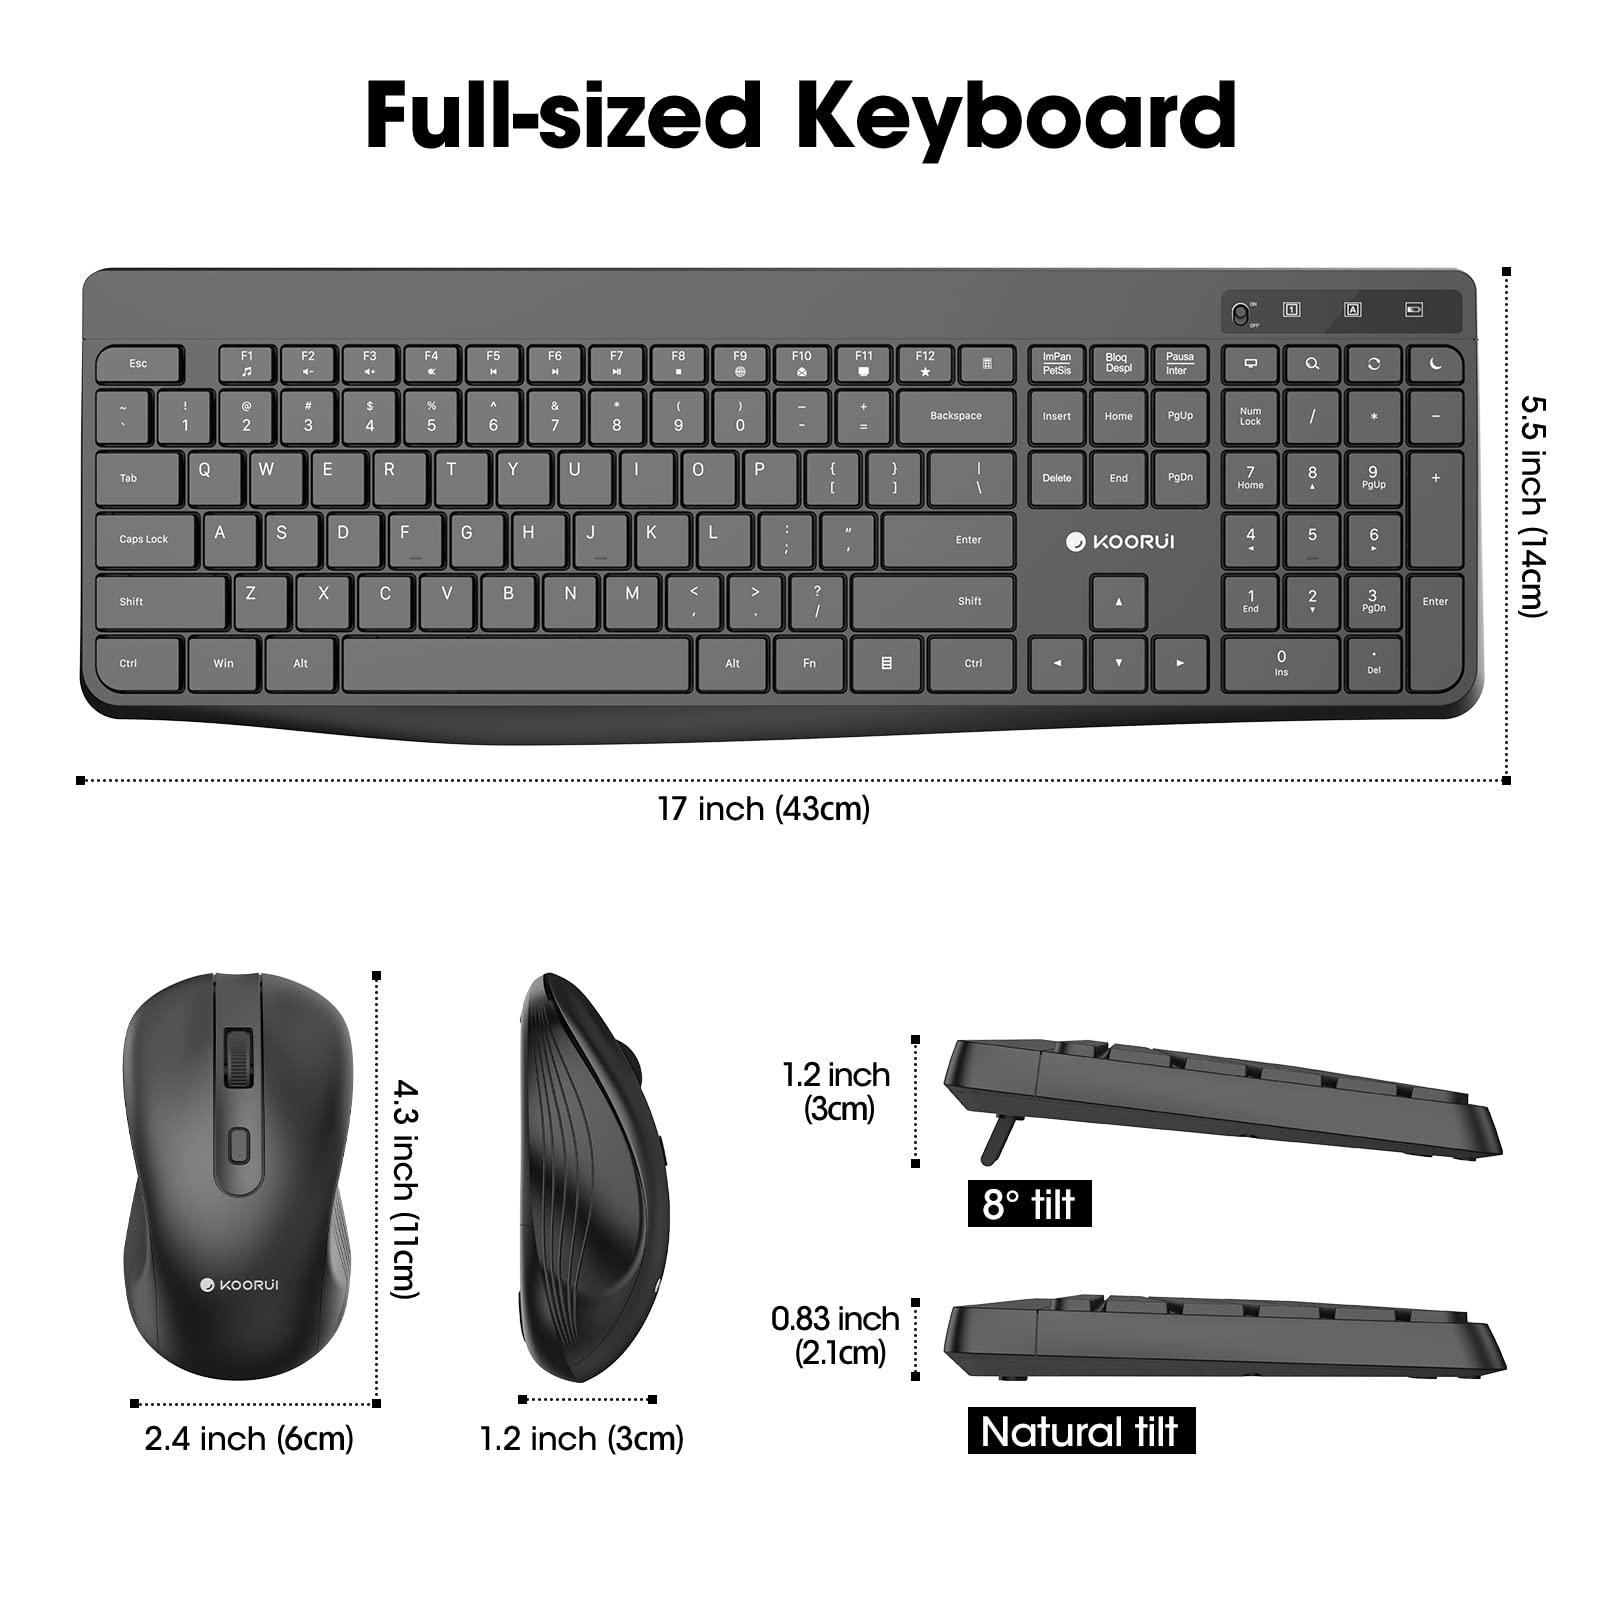 KOORUI Wireless Keyboard and Mouse Combos, 2.4G Silent Full Size Keyboard 3DPI Mouse for Windows MacOS Linux, 12 Multimedia and Shortcut Keys Desktop Computer/Laptop/PC-Black (Battery Not Included)